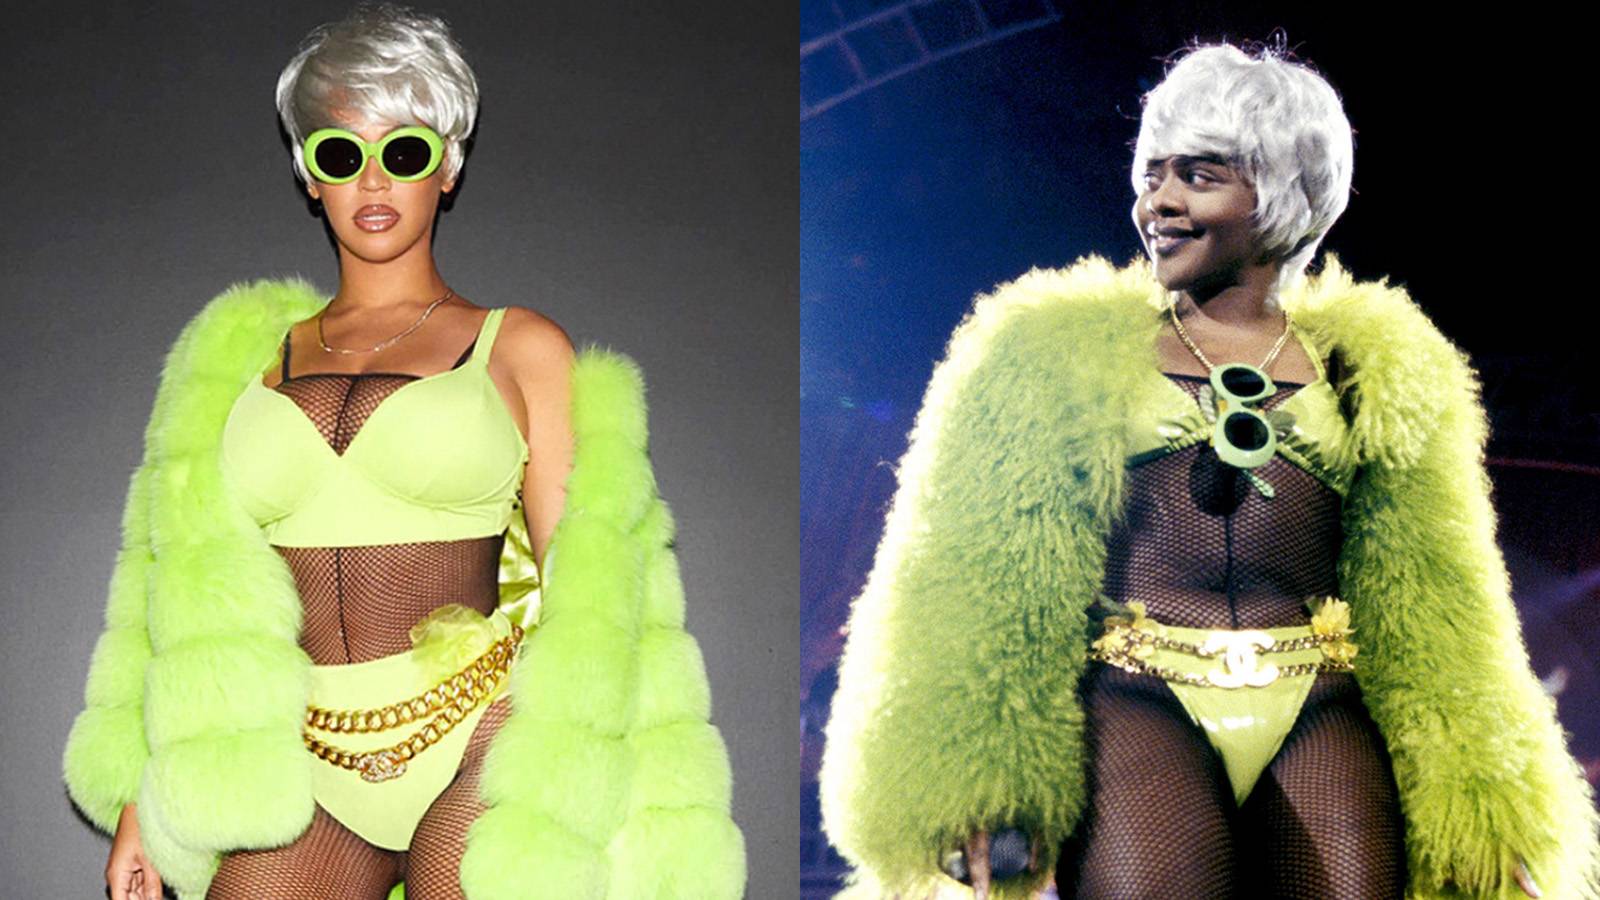 Lil Kim Was Speechless Over Beyonce's Halloween Costume Tribute of Her, News